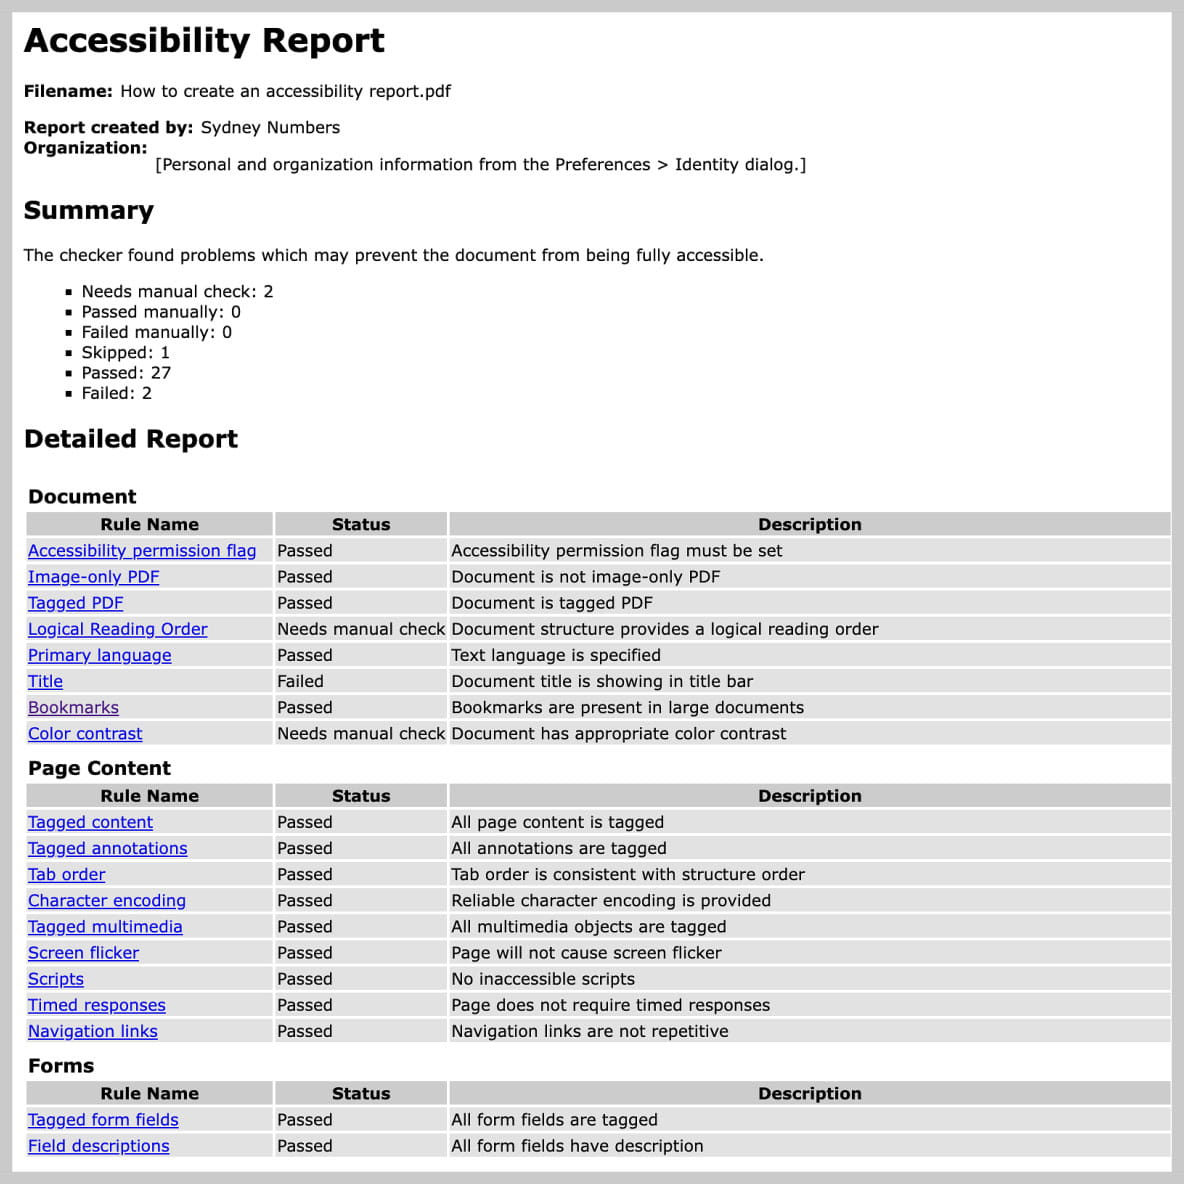 Screenshot showing a passing accessibility report from Adobe Acrobat Pro